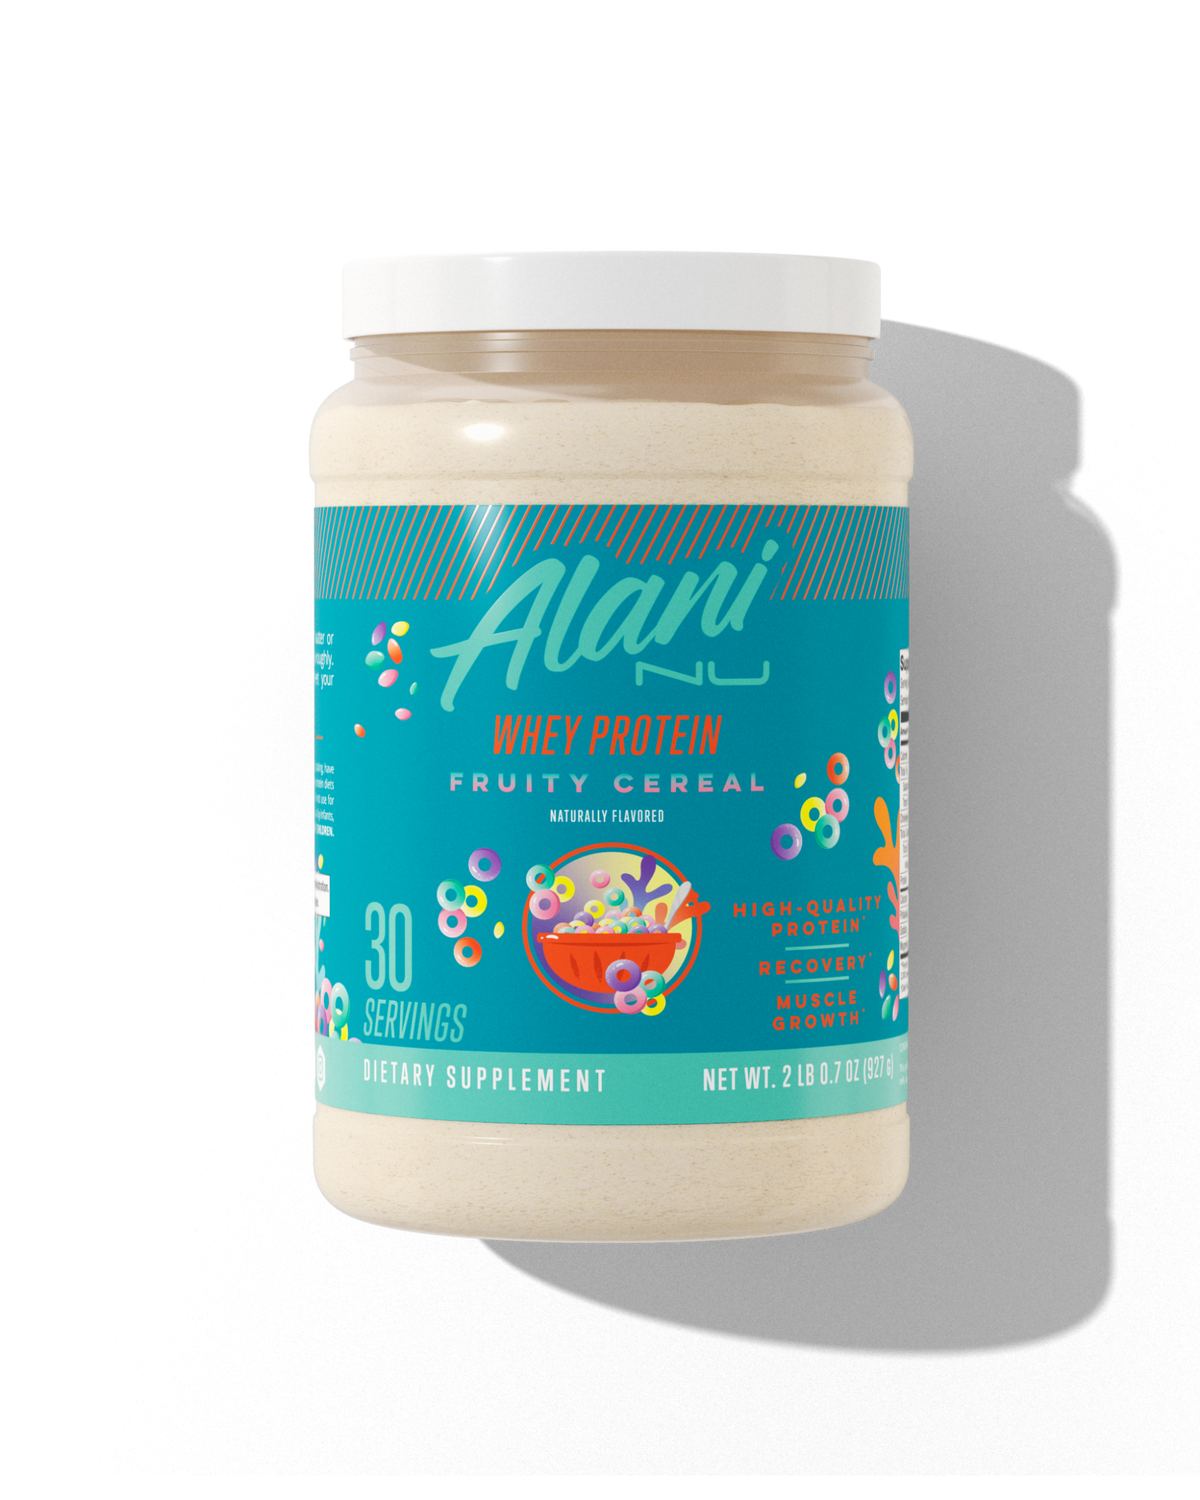 A 30 serving container  of Alani Nu's Fruity Cereal whey protein.